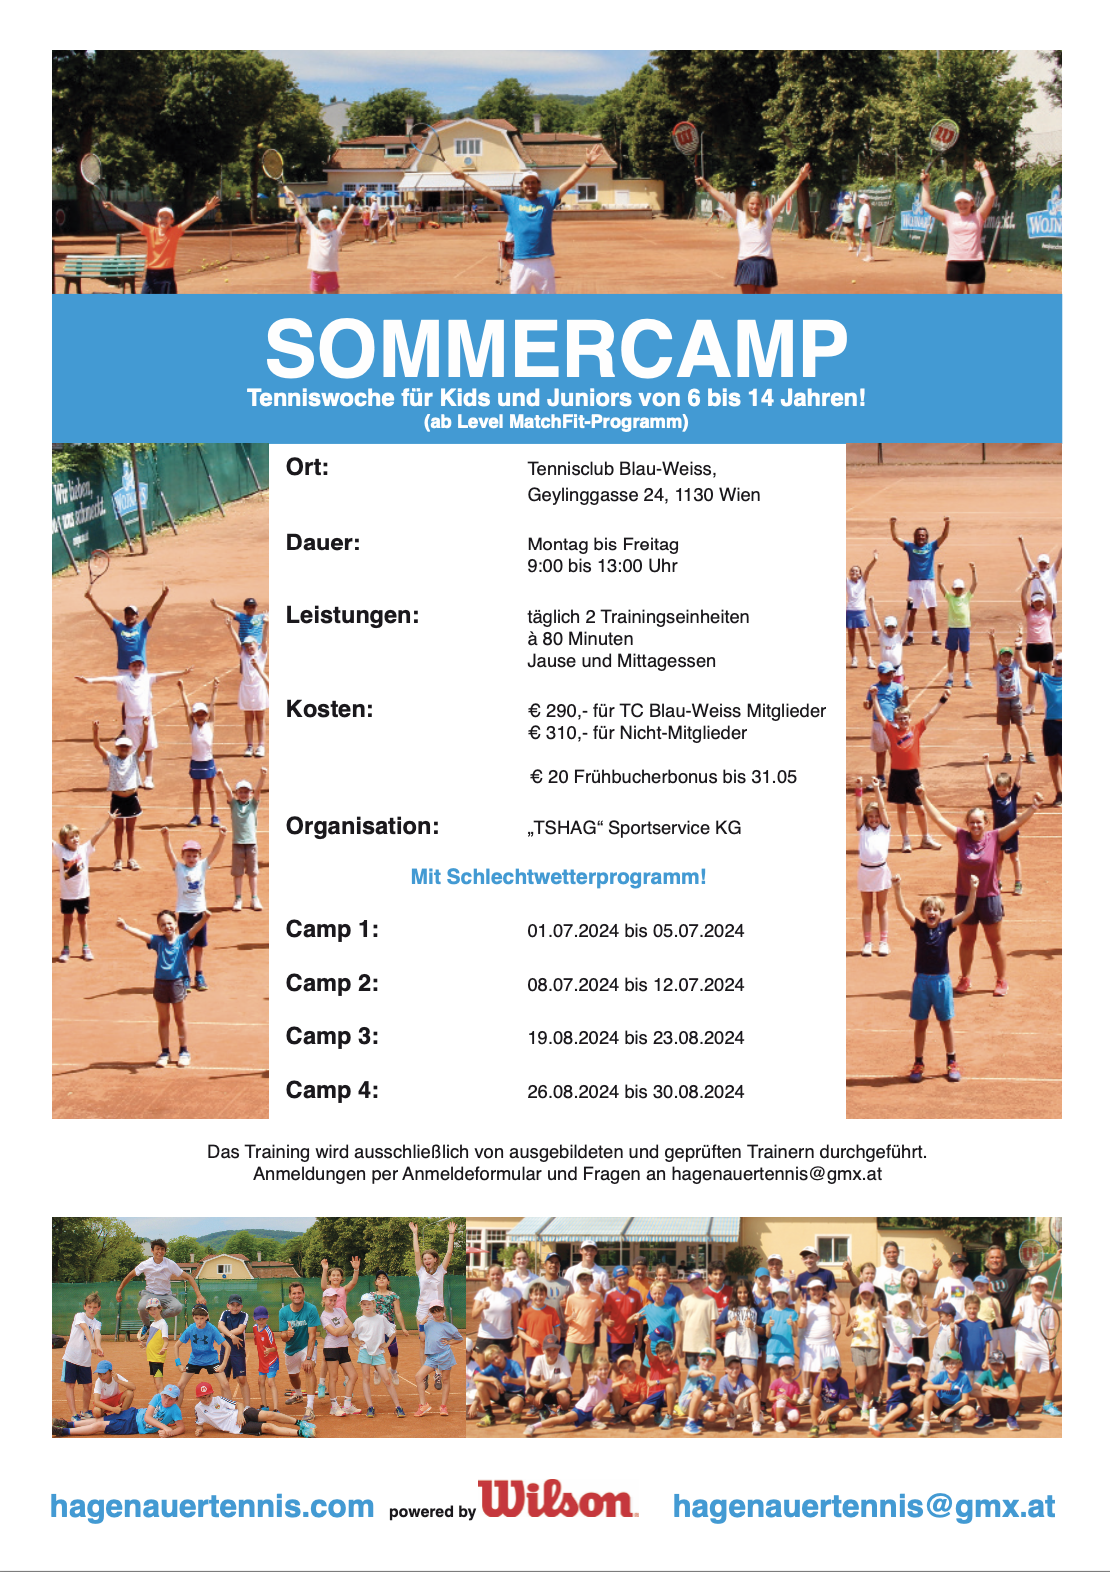 Sommercamps 2024